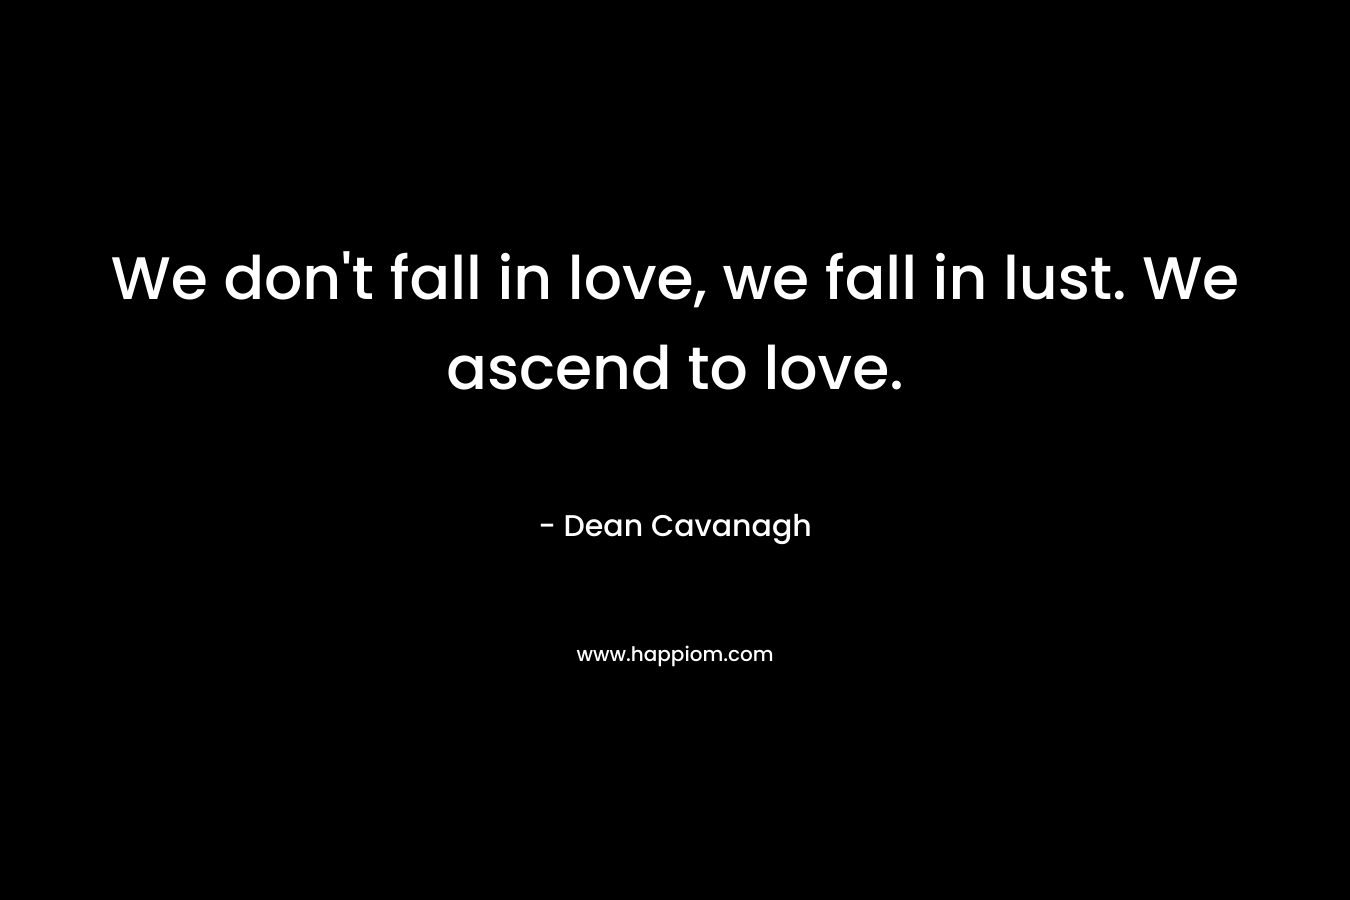 We don't fall in love, we fall in lust. We ascend to love.